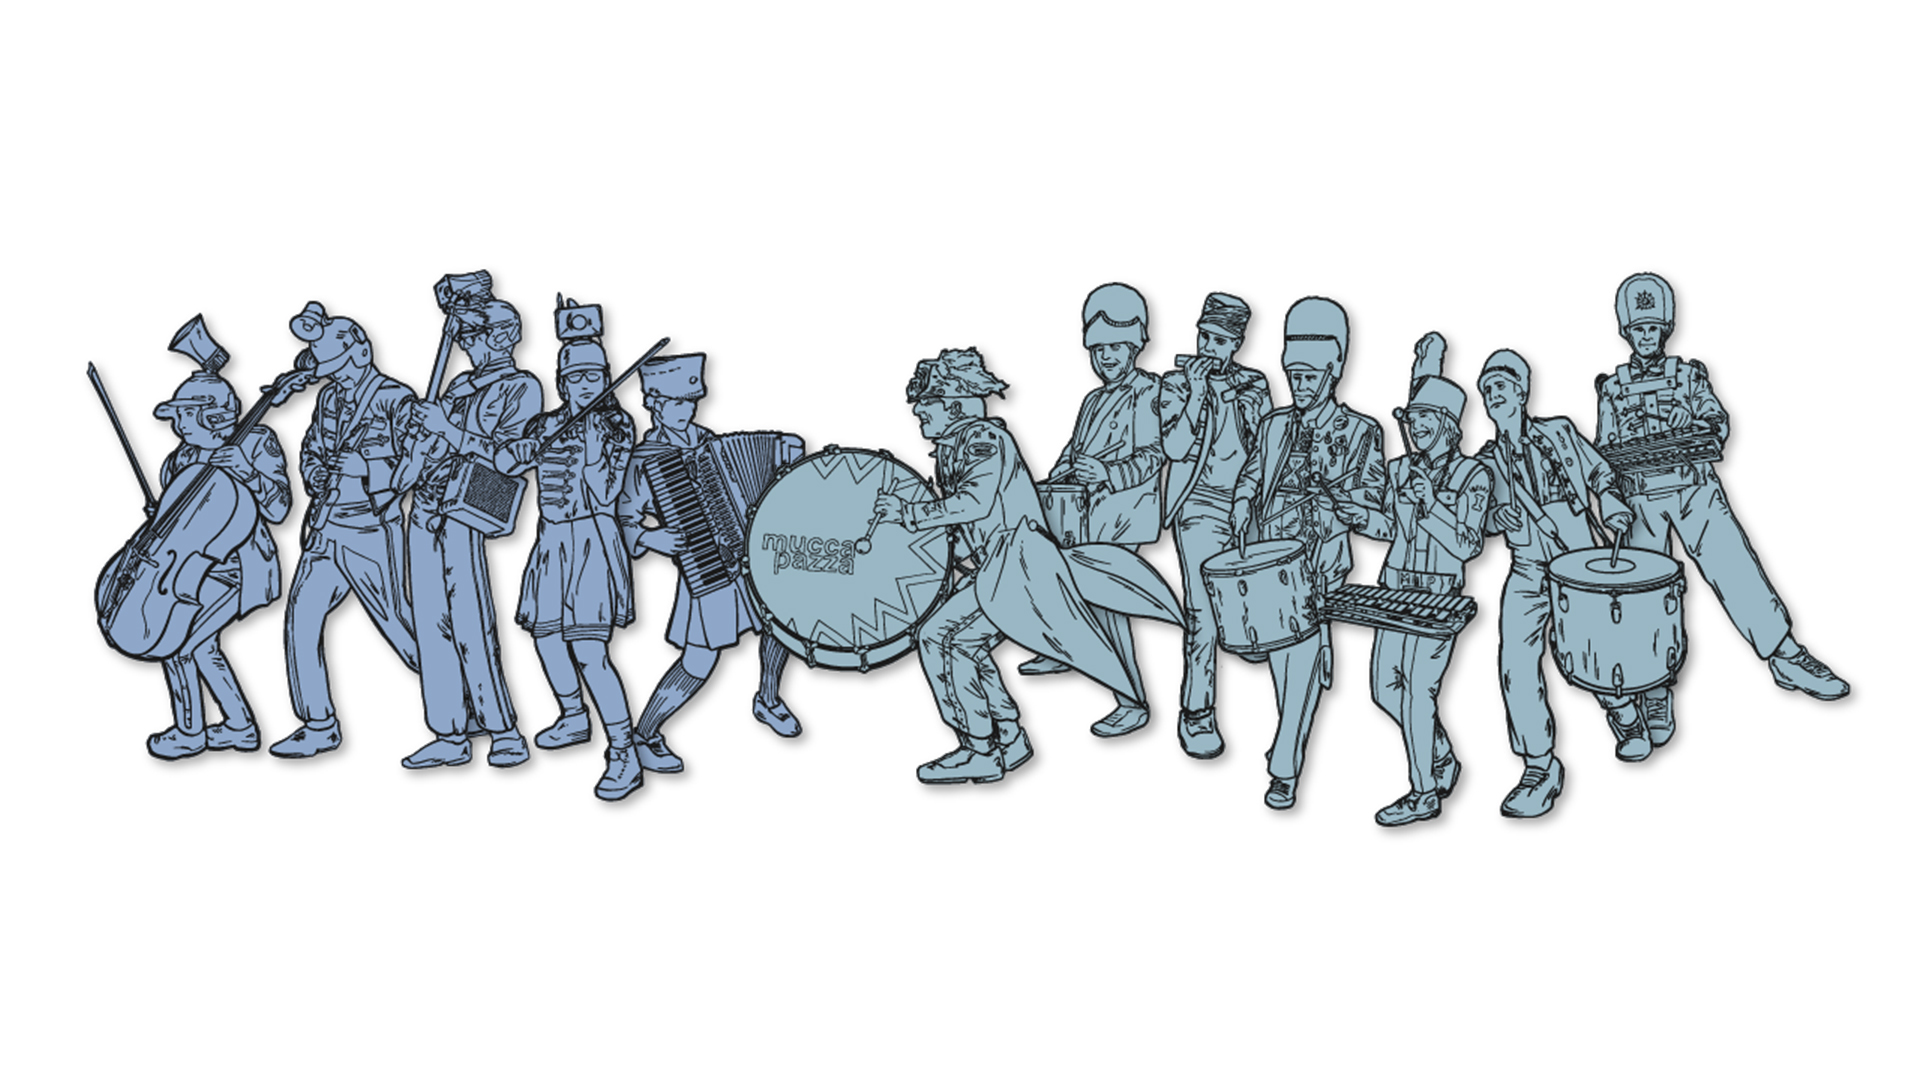 Mucca Pazza’s 2019 Chicago Residency “Coloring Book” Illustrations